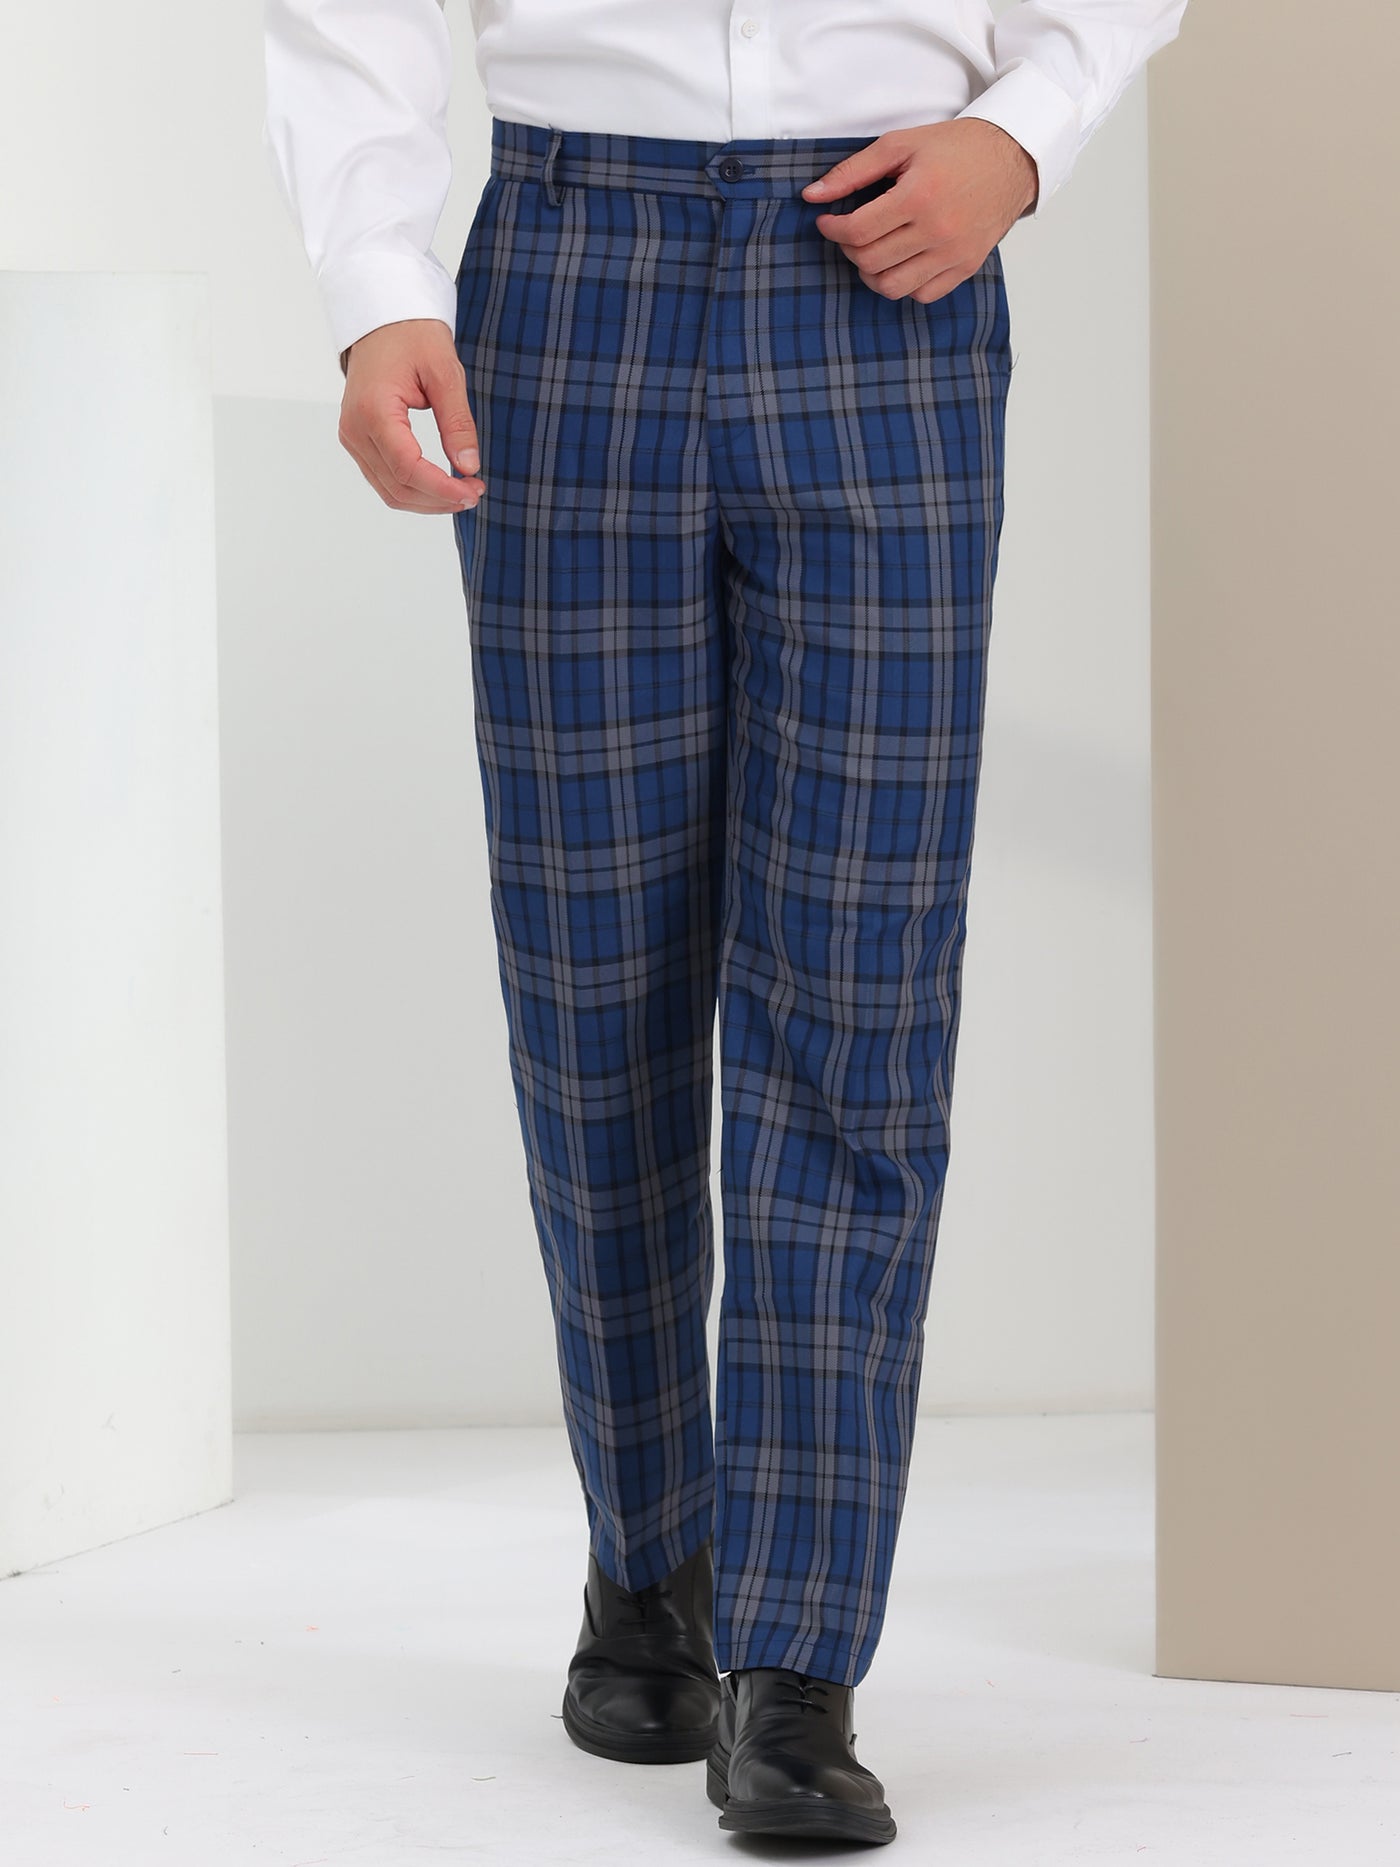 Bublédon Men's Plaid Relax Fit Flat Front Checked Office Work Dress Pants